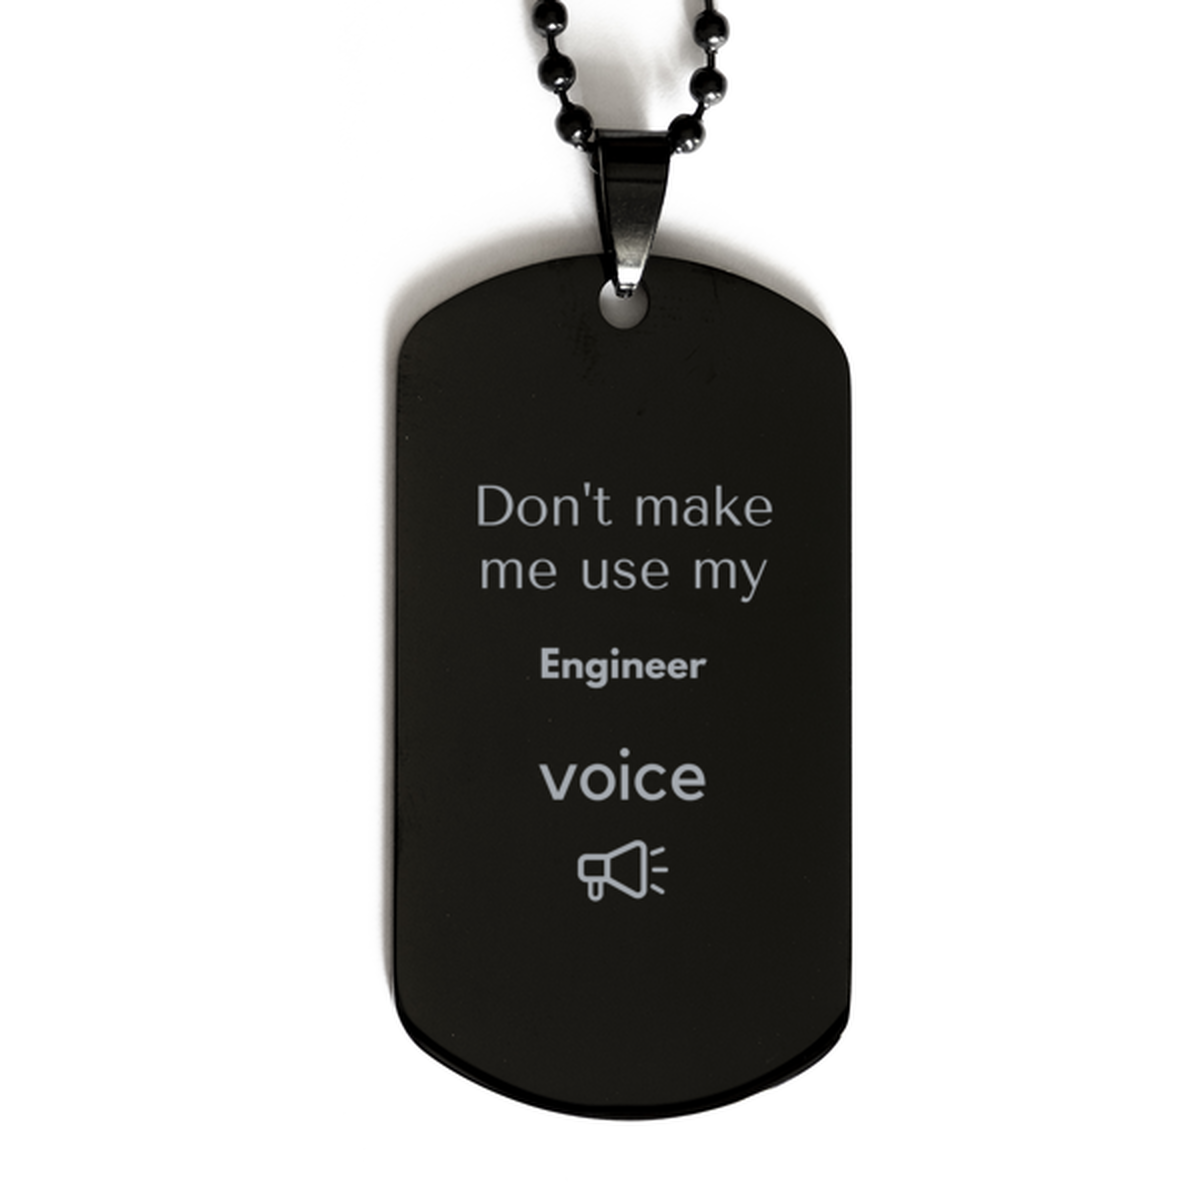 Don't make me use my Engineer voice, Sarcasm Engineer Gifts, Christmas Engineer Black Dog Tag Birthday Unique Gifts For Engineer Coworkers, Men, Women, Colleague, Friends